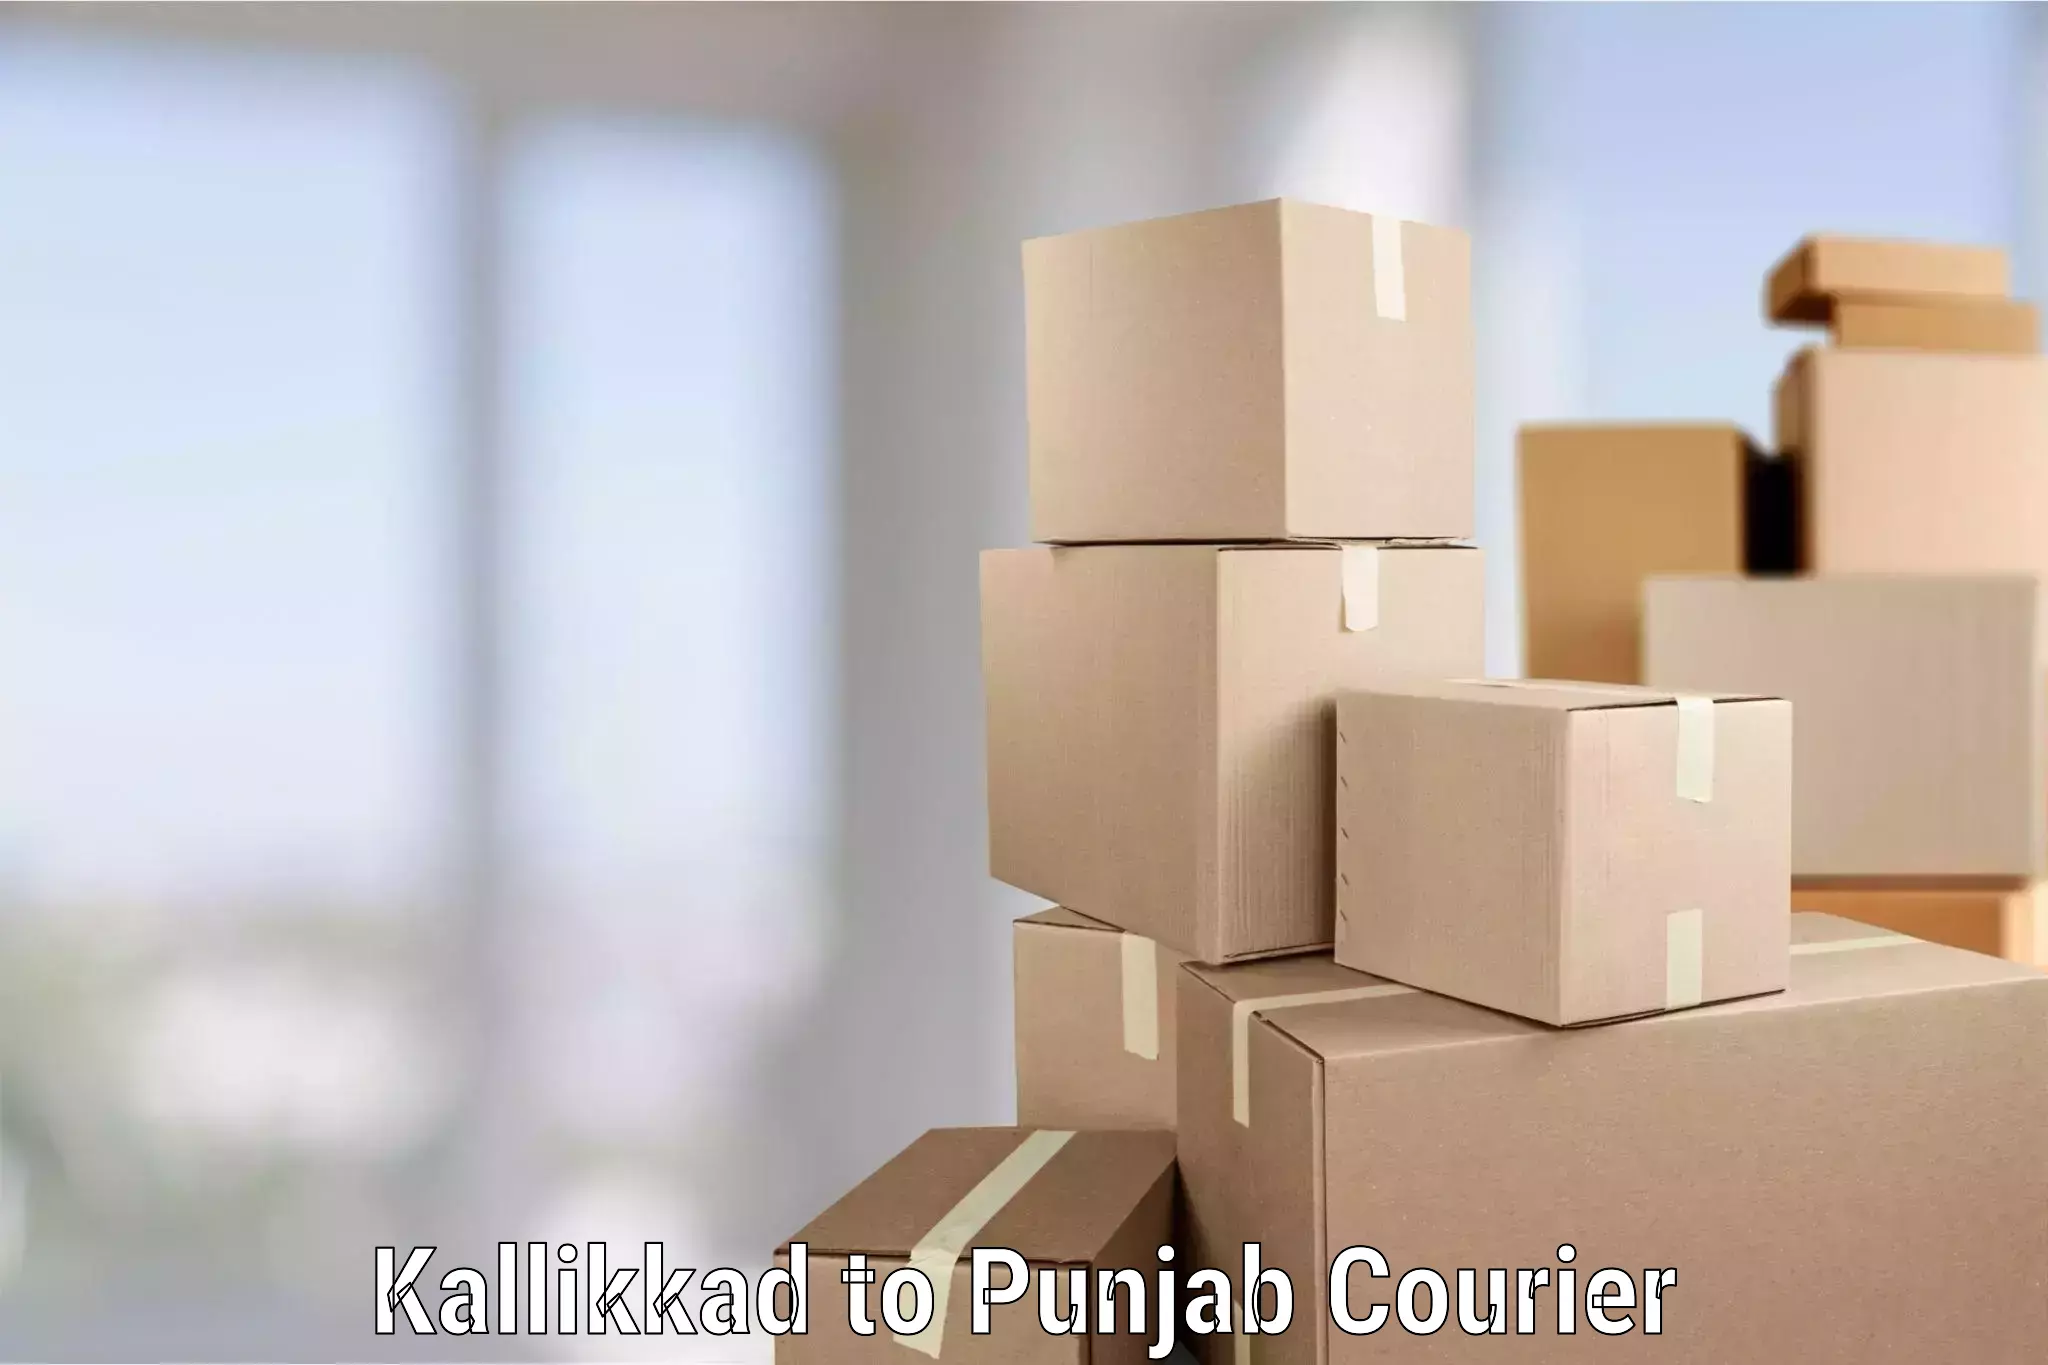 Reliable relocation services Kallikkad to Punjab